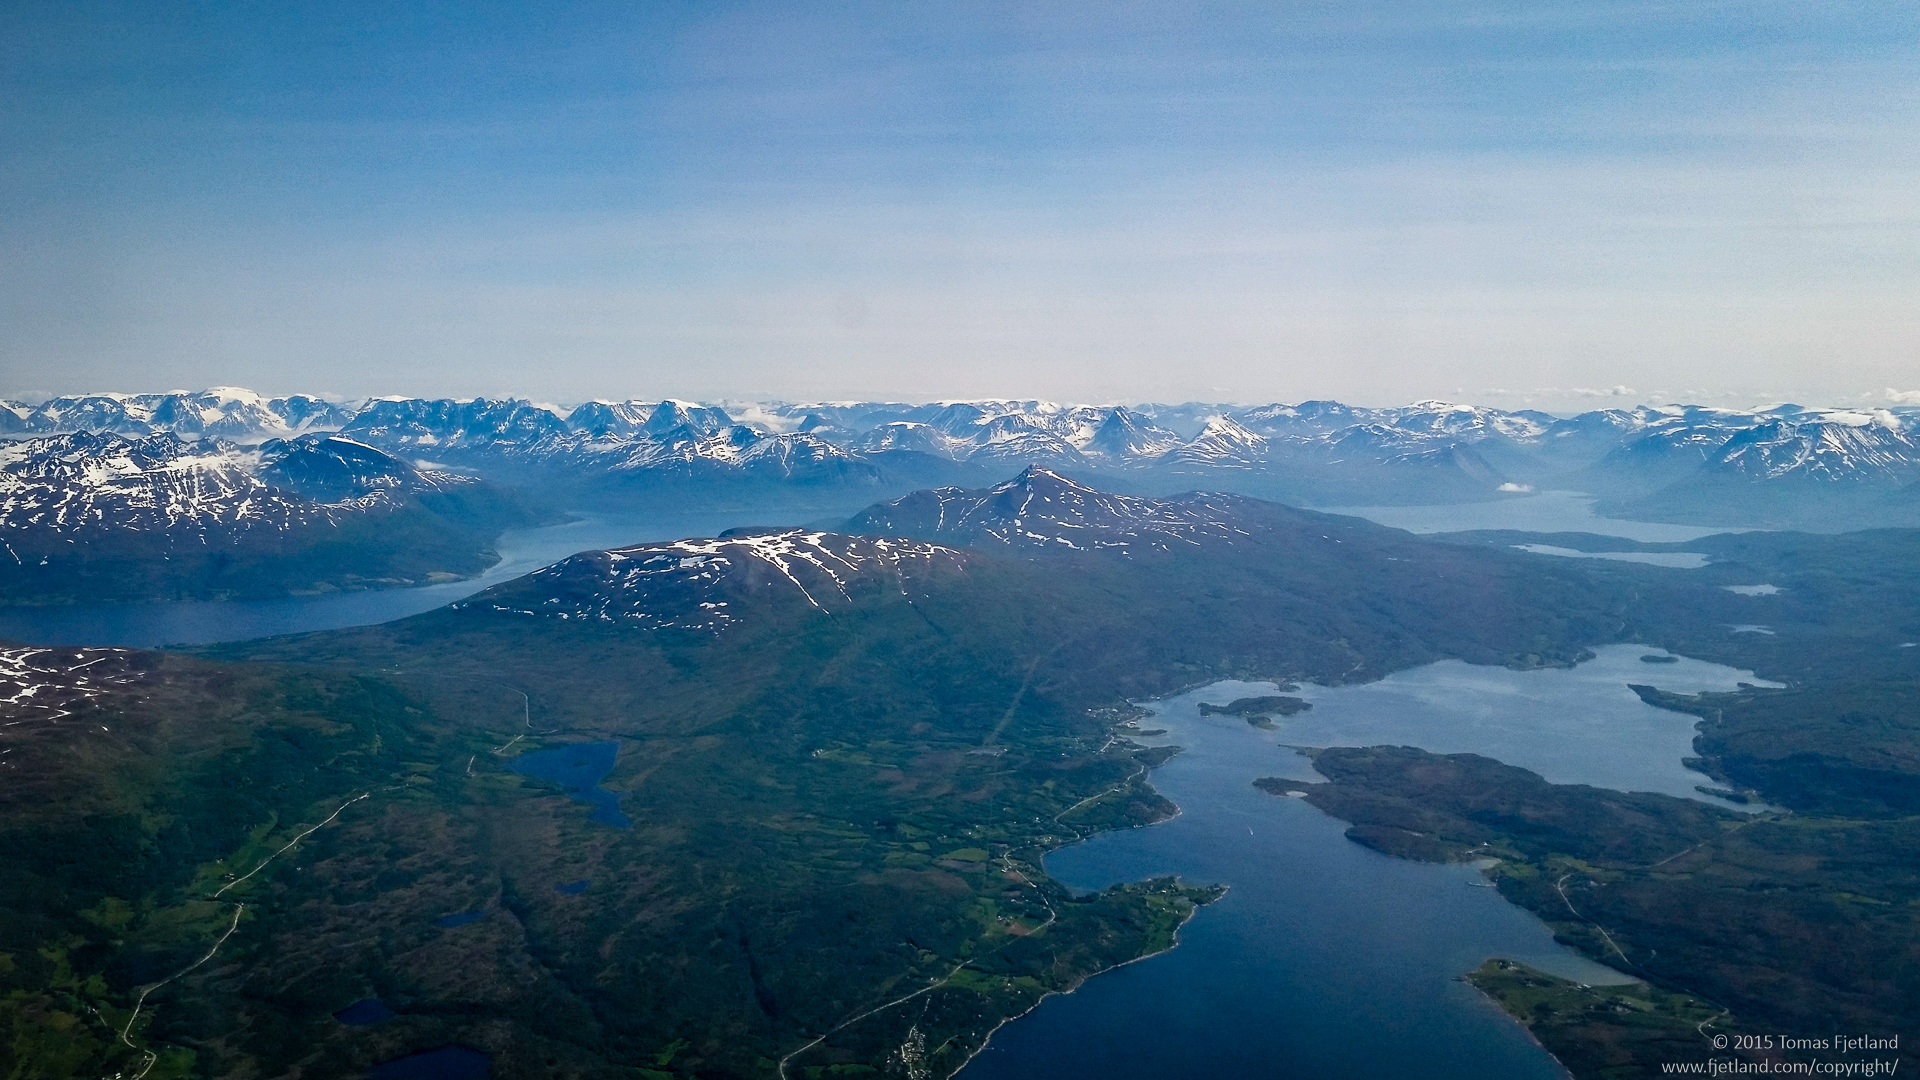 Approaching Tromsø airport for a meaningless ID control